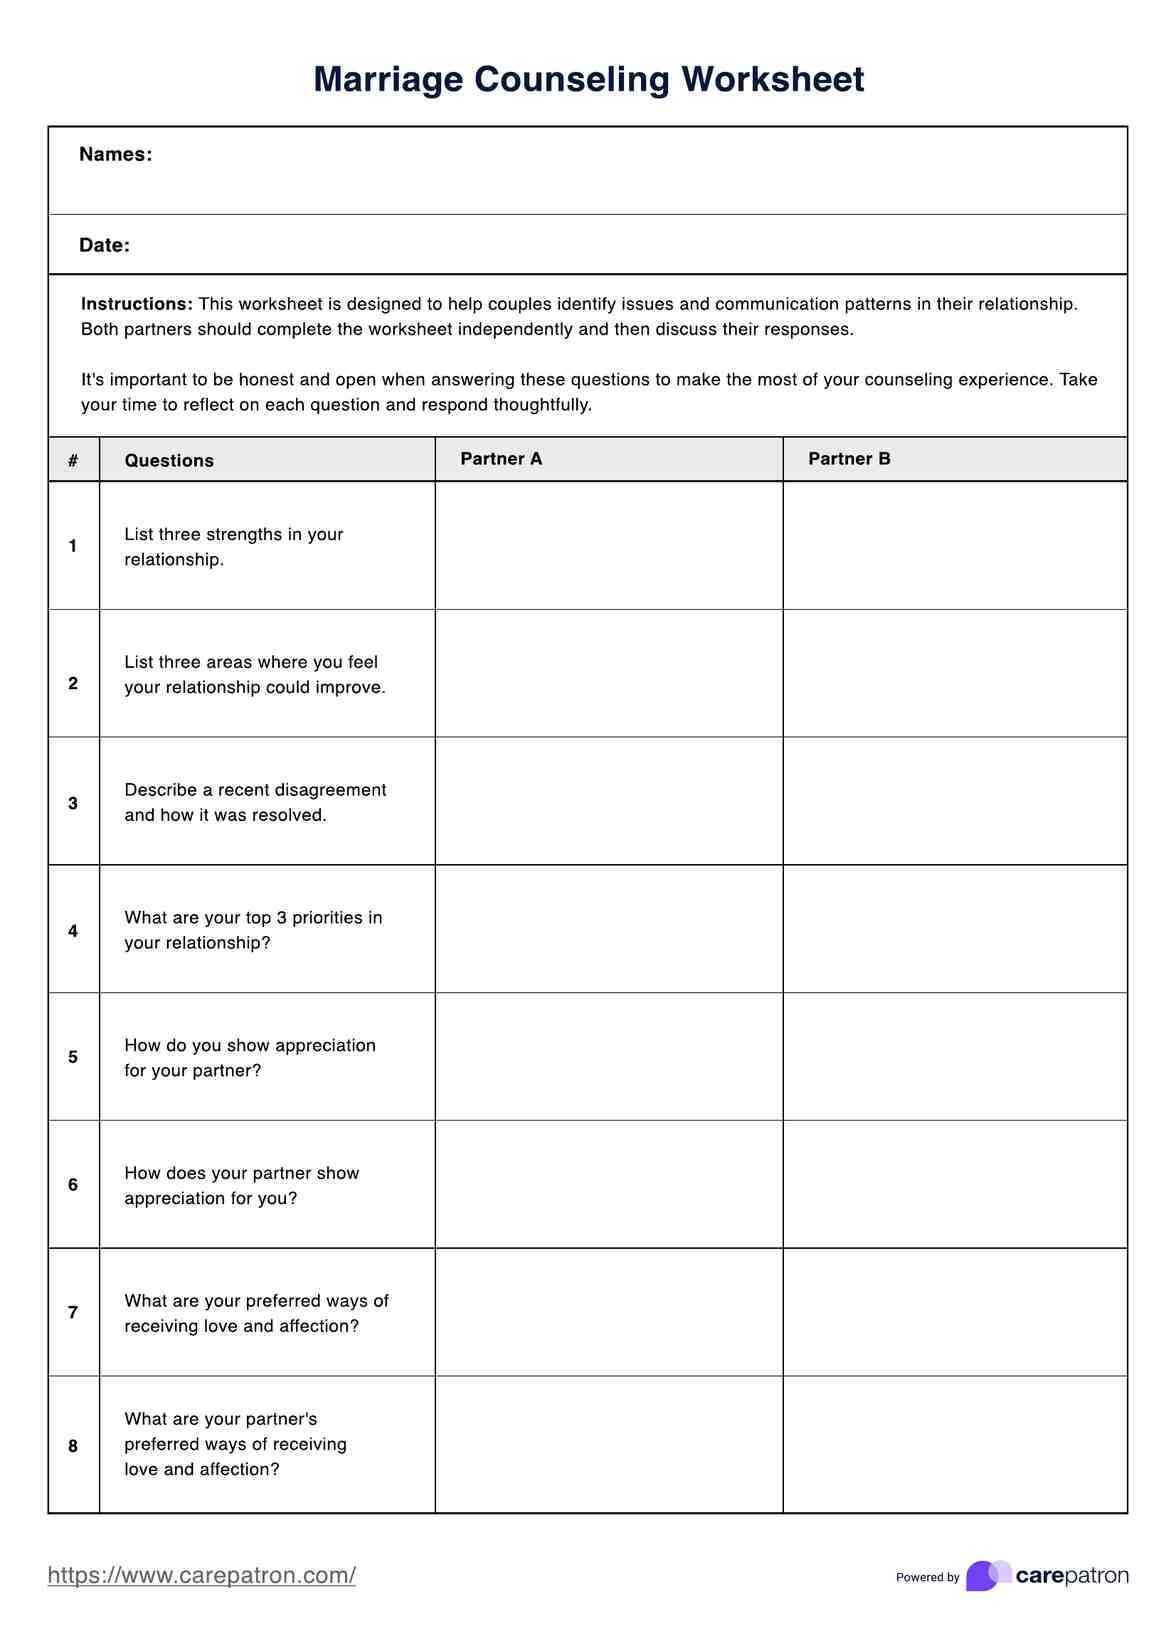 Marriage Counseling Worksheets PDF Example